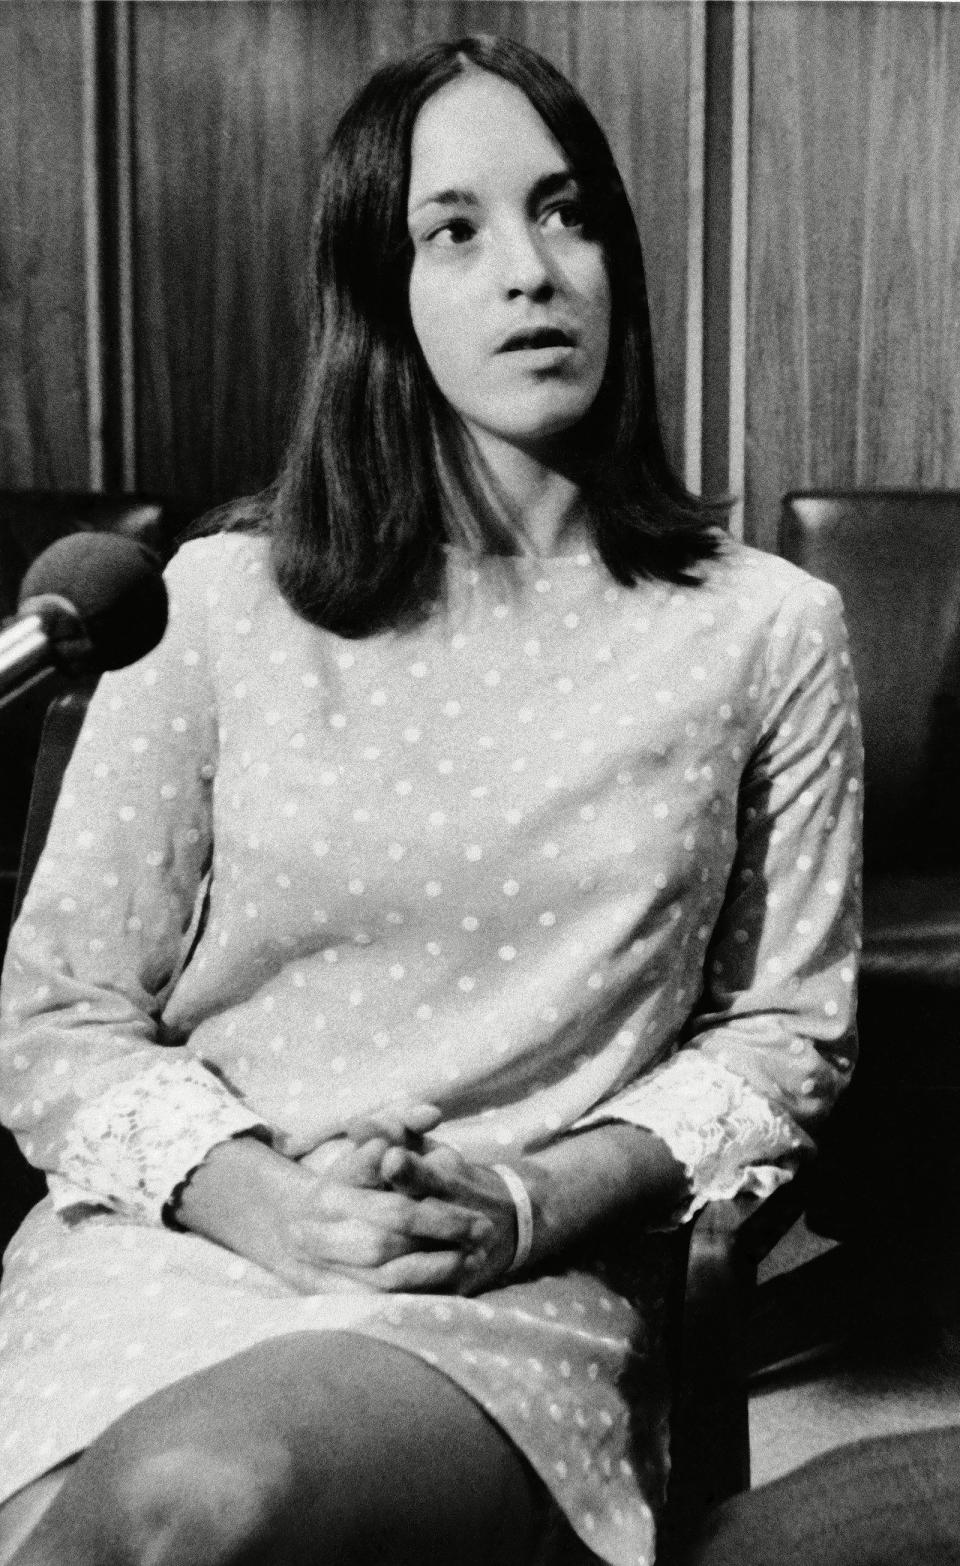 <p>Susan Atkins, then 21, is shown at a Dec. 3, 1969, news conference in Santa Monica, California, where her attorney, Richard Caballero, said she was at the scenes of the slayings of Sharon Tate and four others at her home and of Leno and Rosemary LaBianca. But she was under a "hypnotic spell" and had "nothing to do with the murders," Caballero said. She was "hypnotized and intrigued" into joining the cult led by Manson, he said.</p>